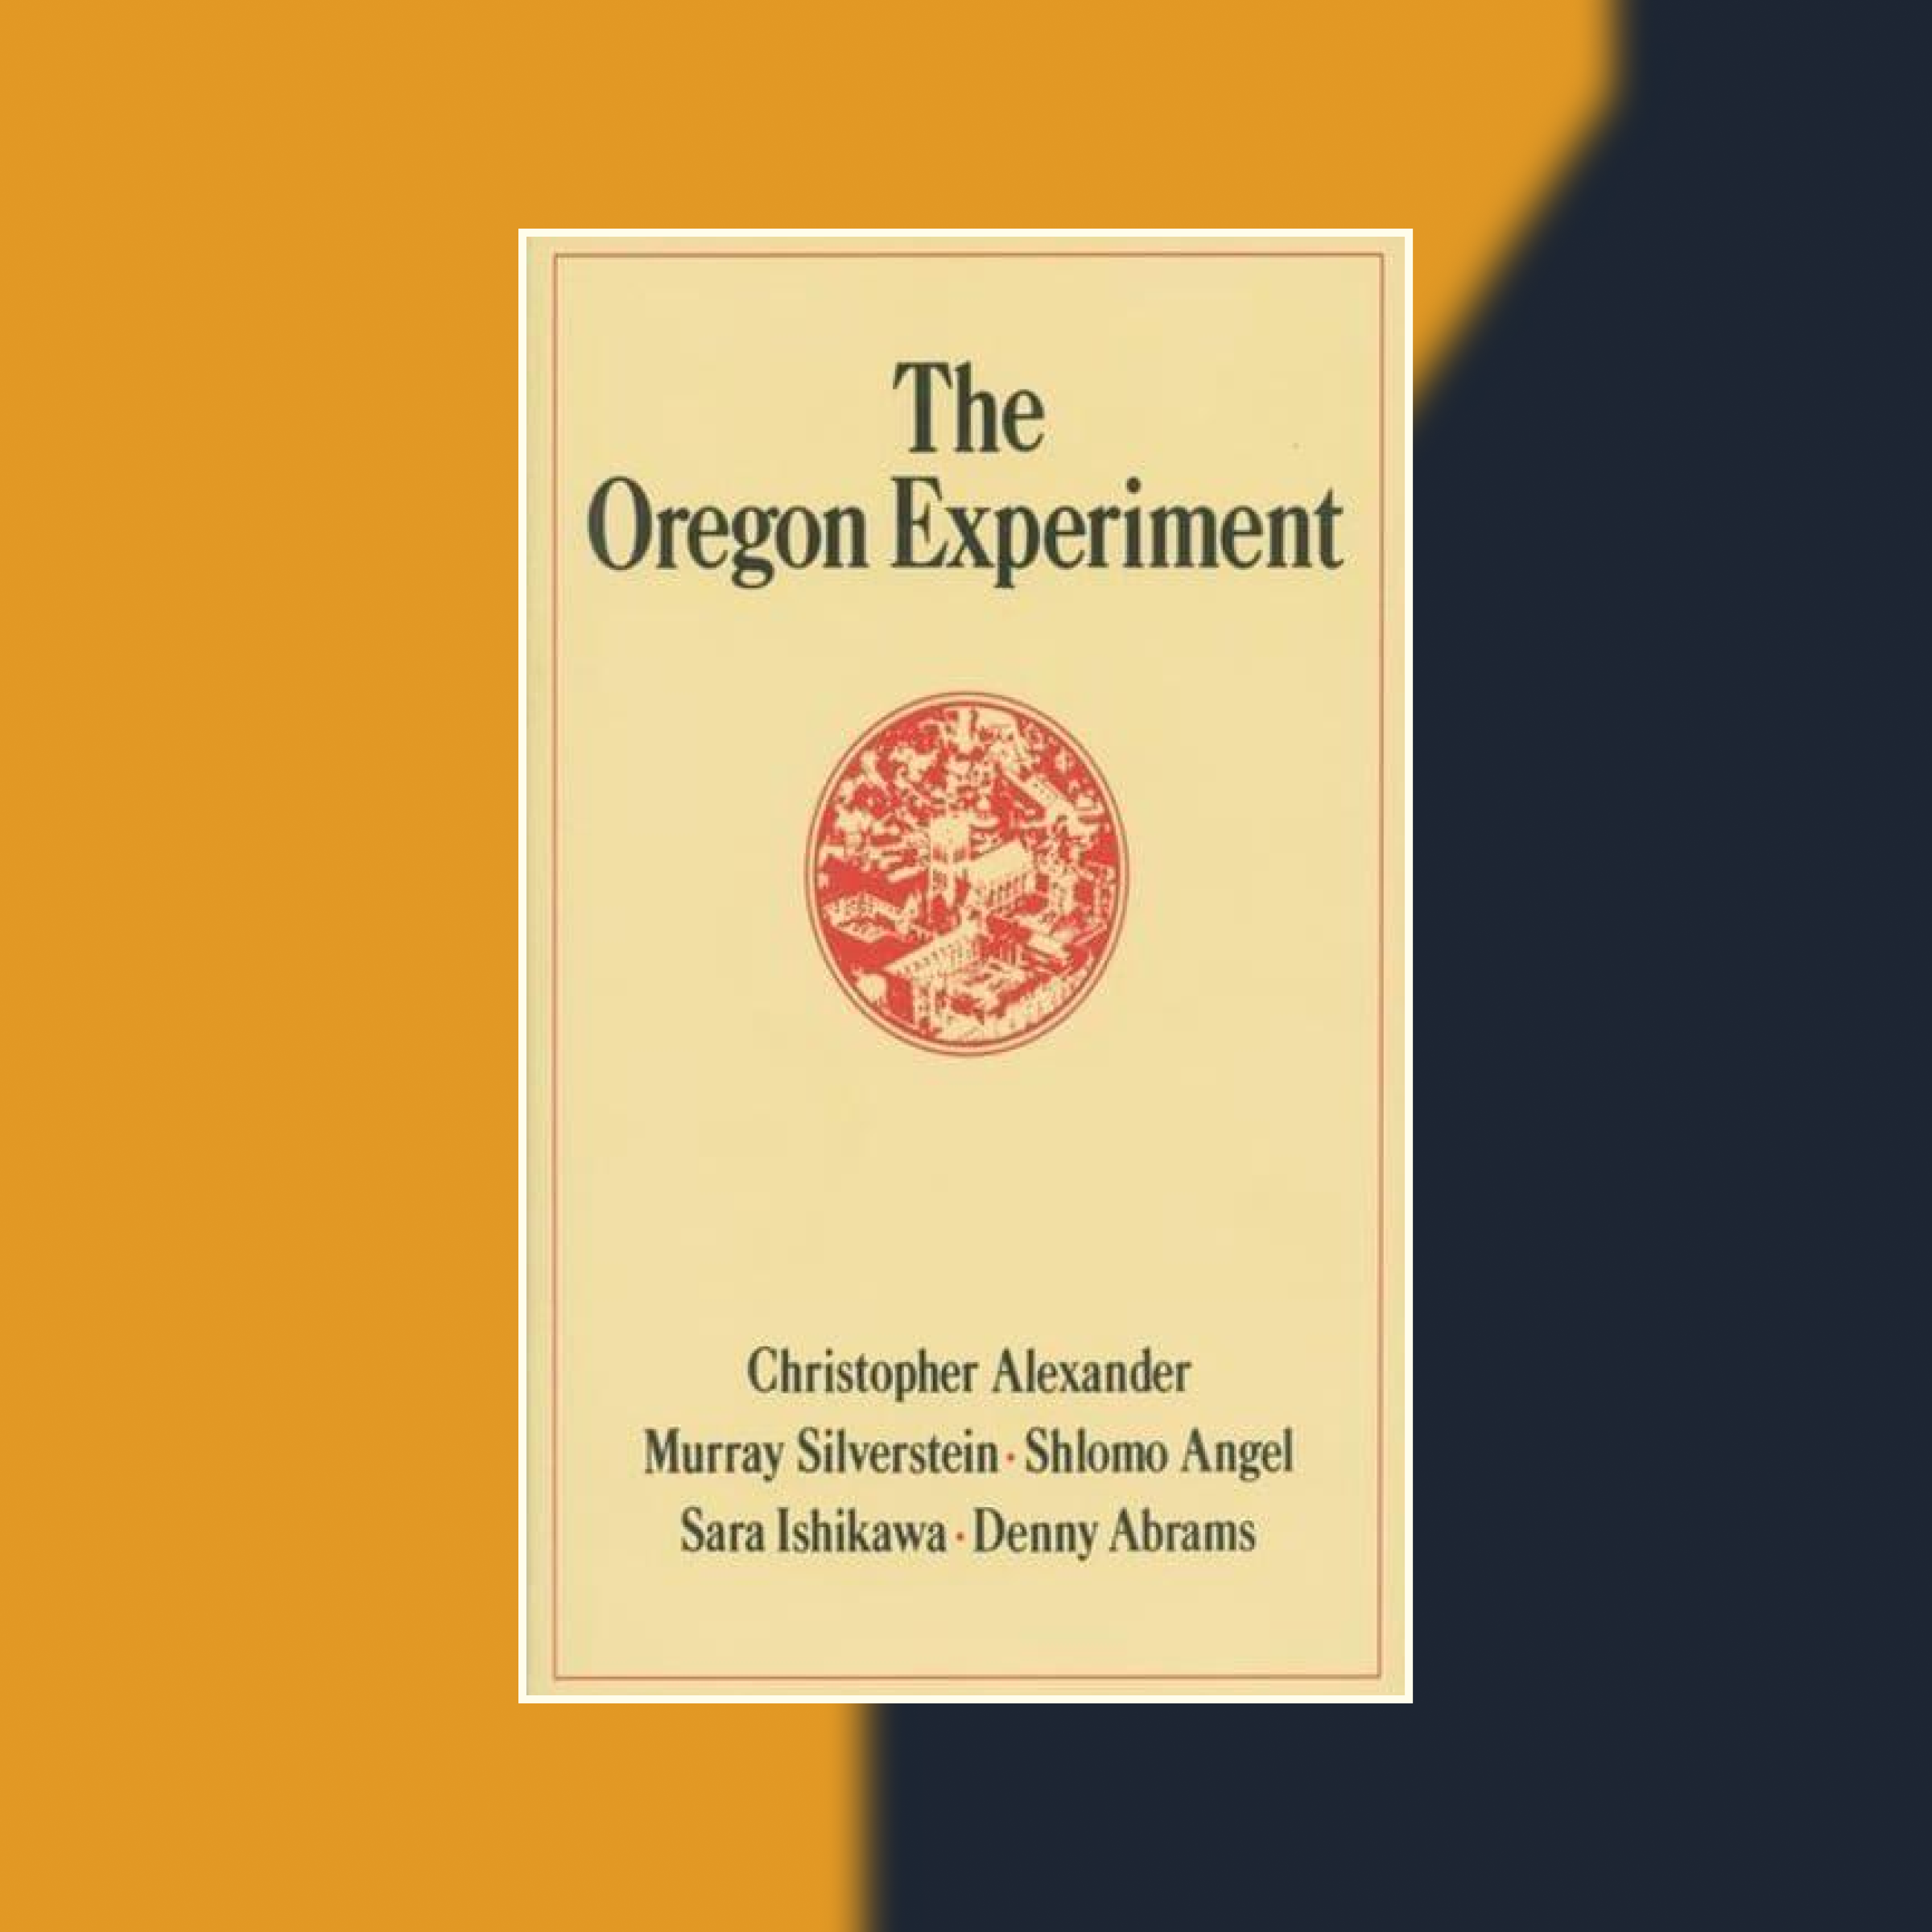 Book cover of The Oregon Experiment against an abstract painted background